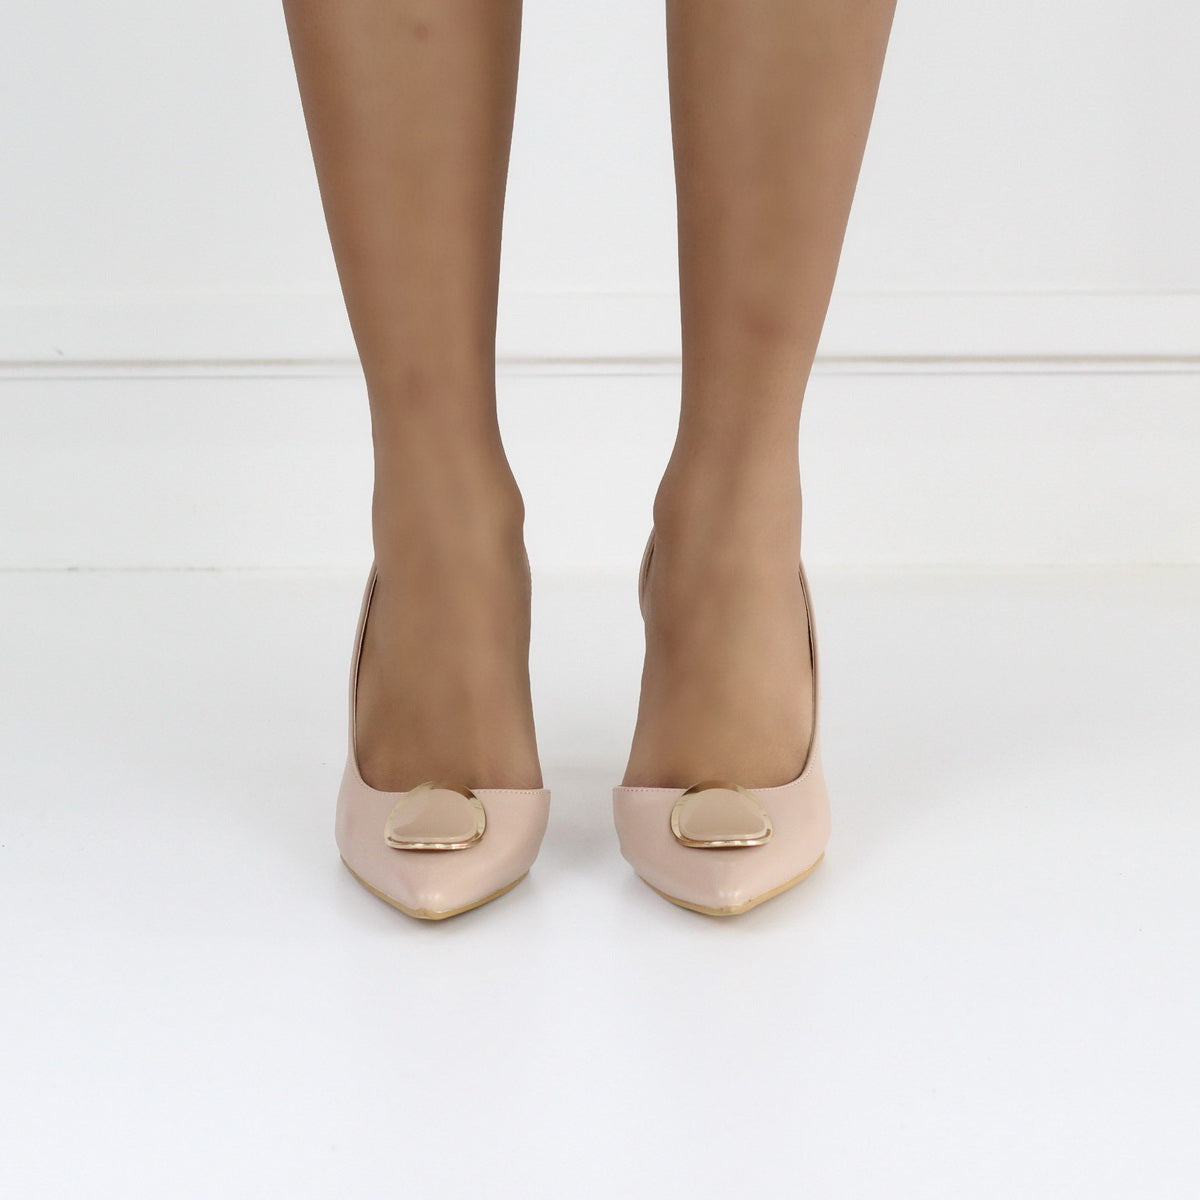 Nude 9cm heel open side court shoe with a gold trim daniella